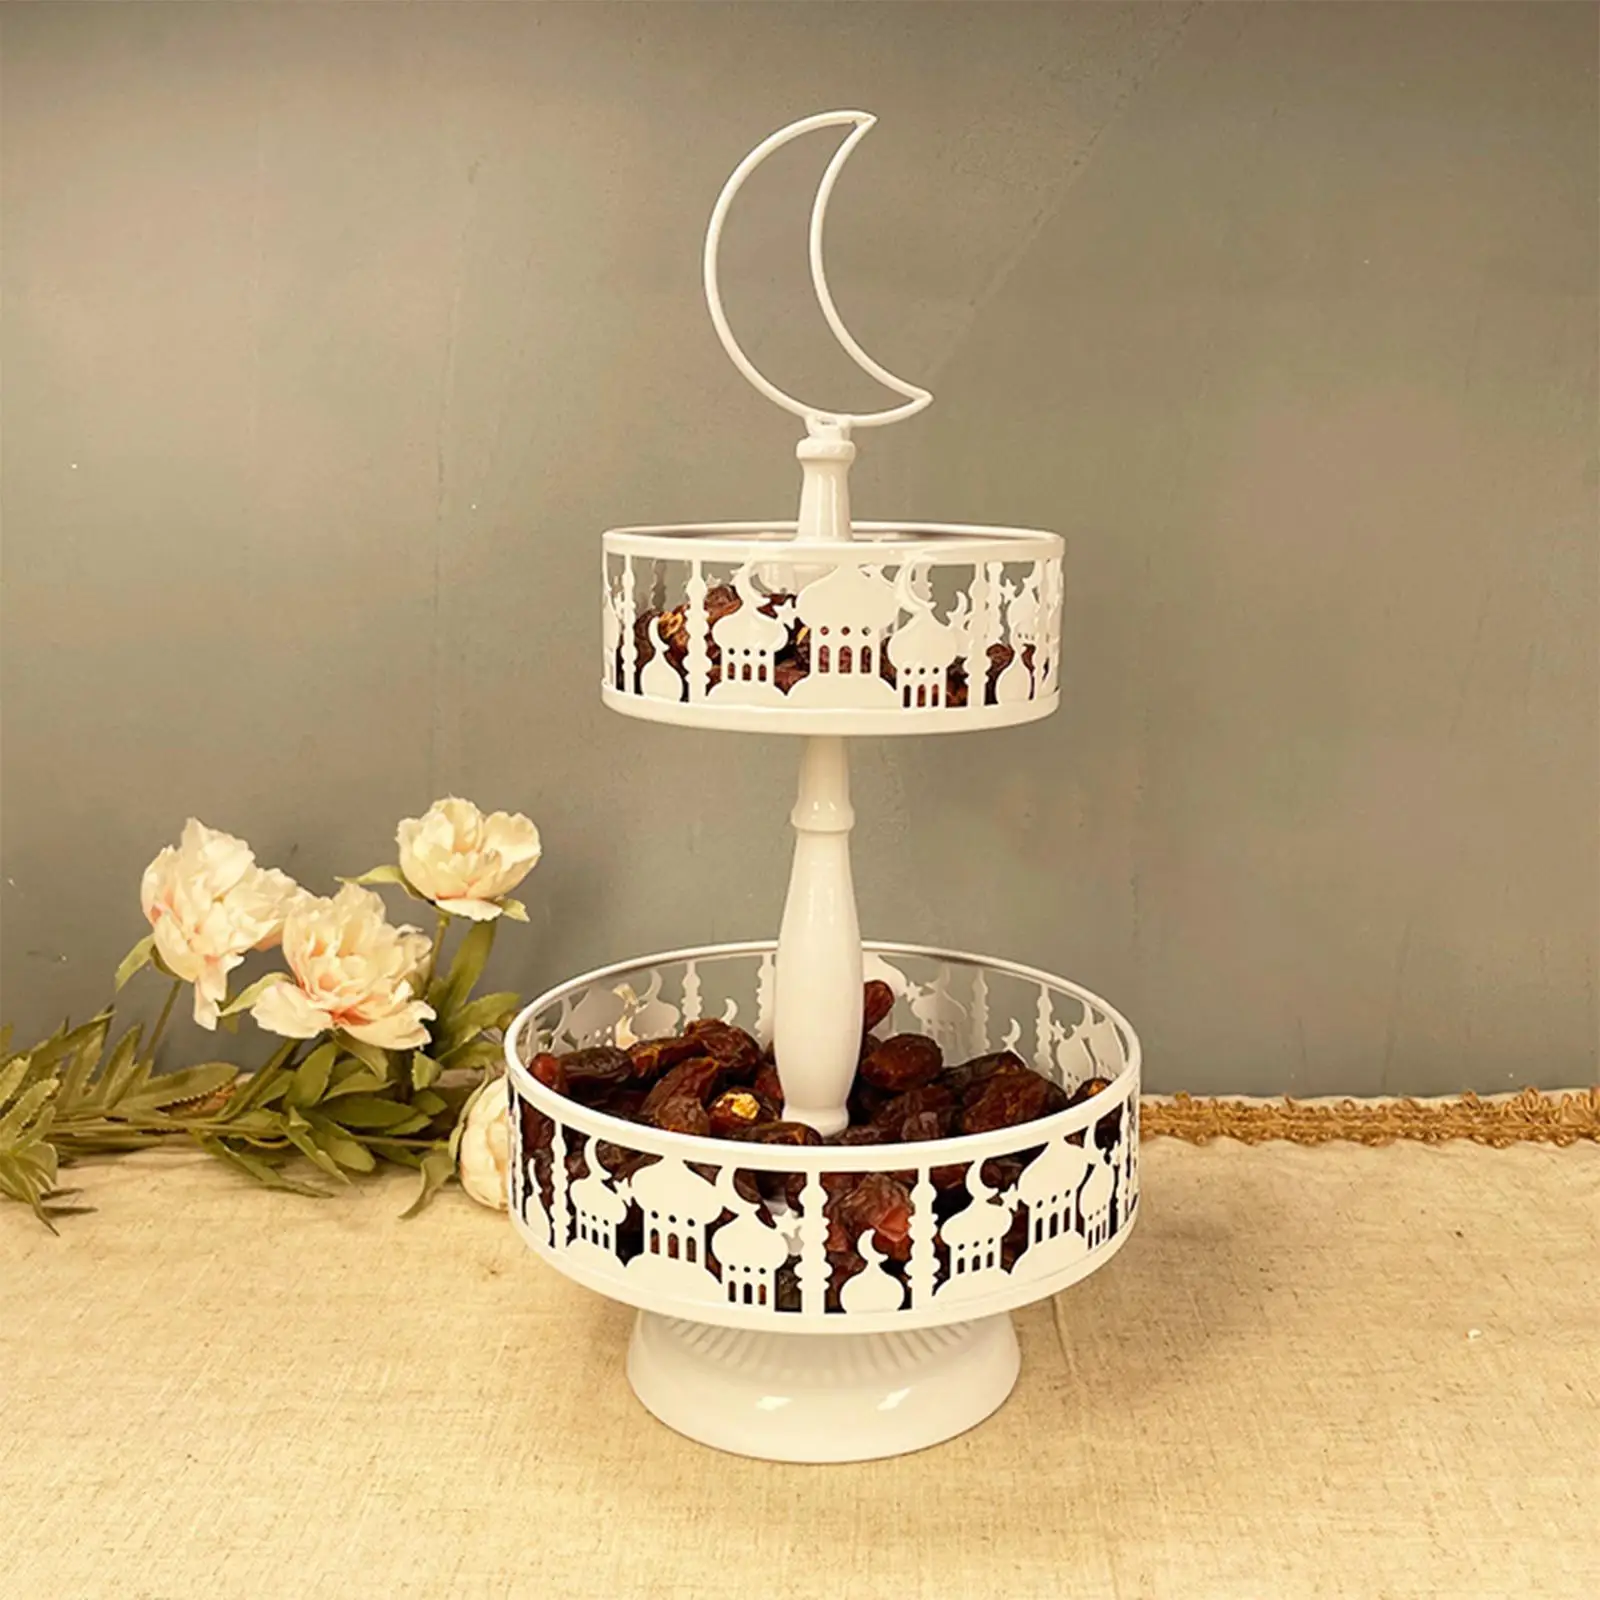 Cake Stand Fruit Self-Help Dessert Candy Dish Pastry Cupcake for Dresser